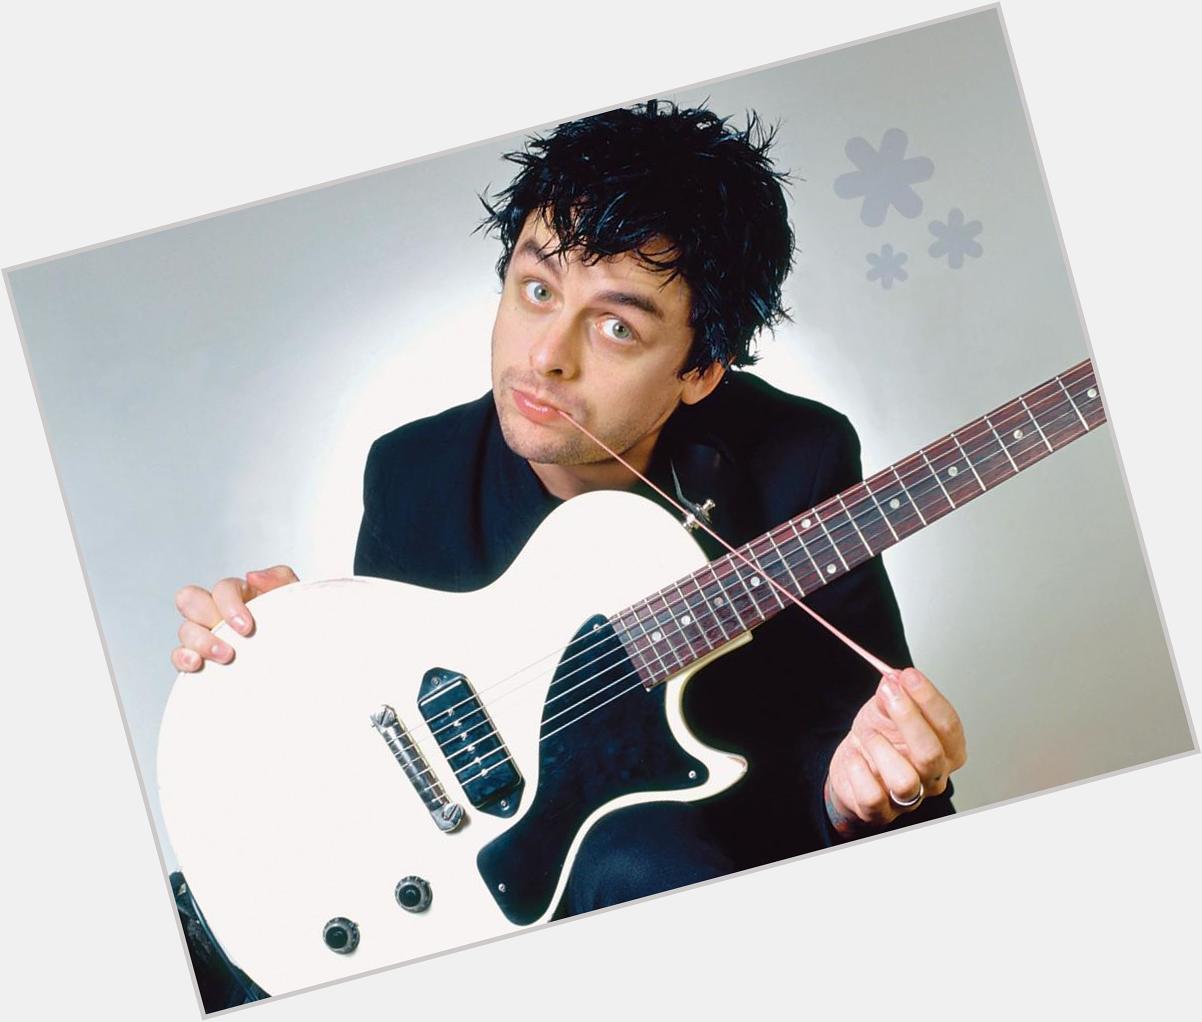 Happy Birthday to Billie Joe Armstrong, who turns 43 today! 